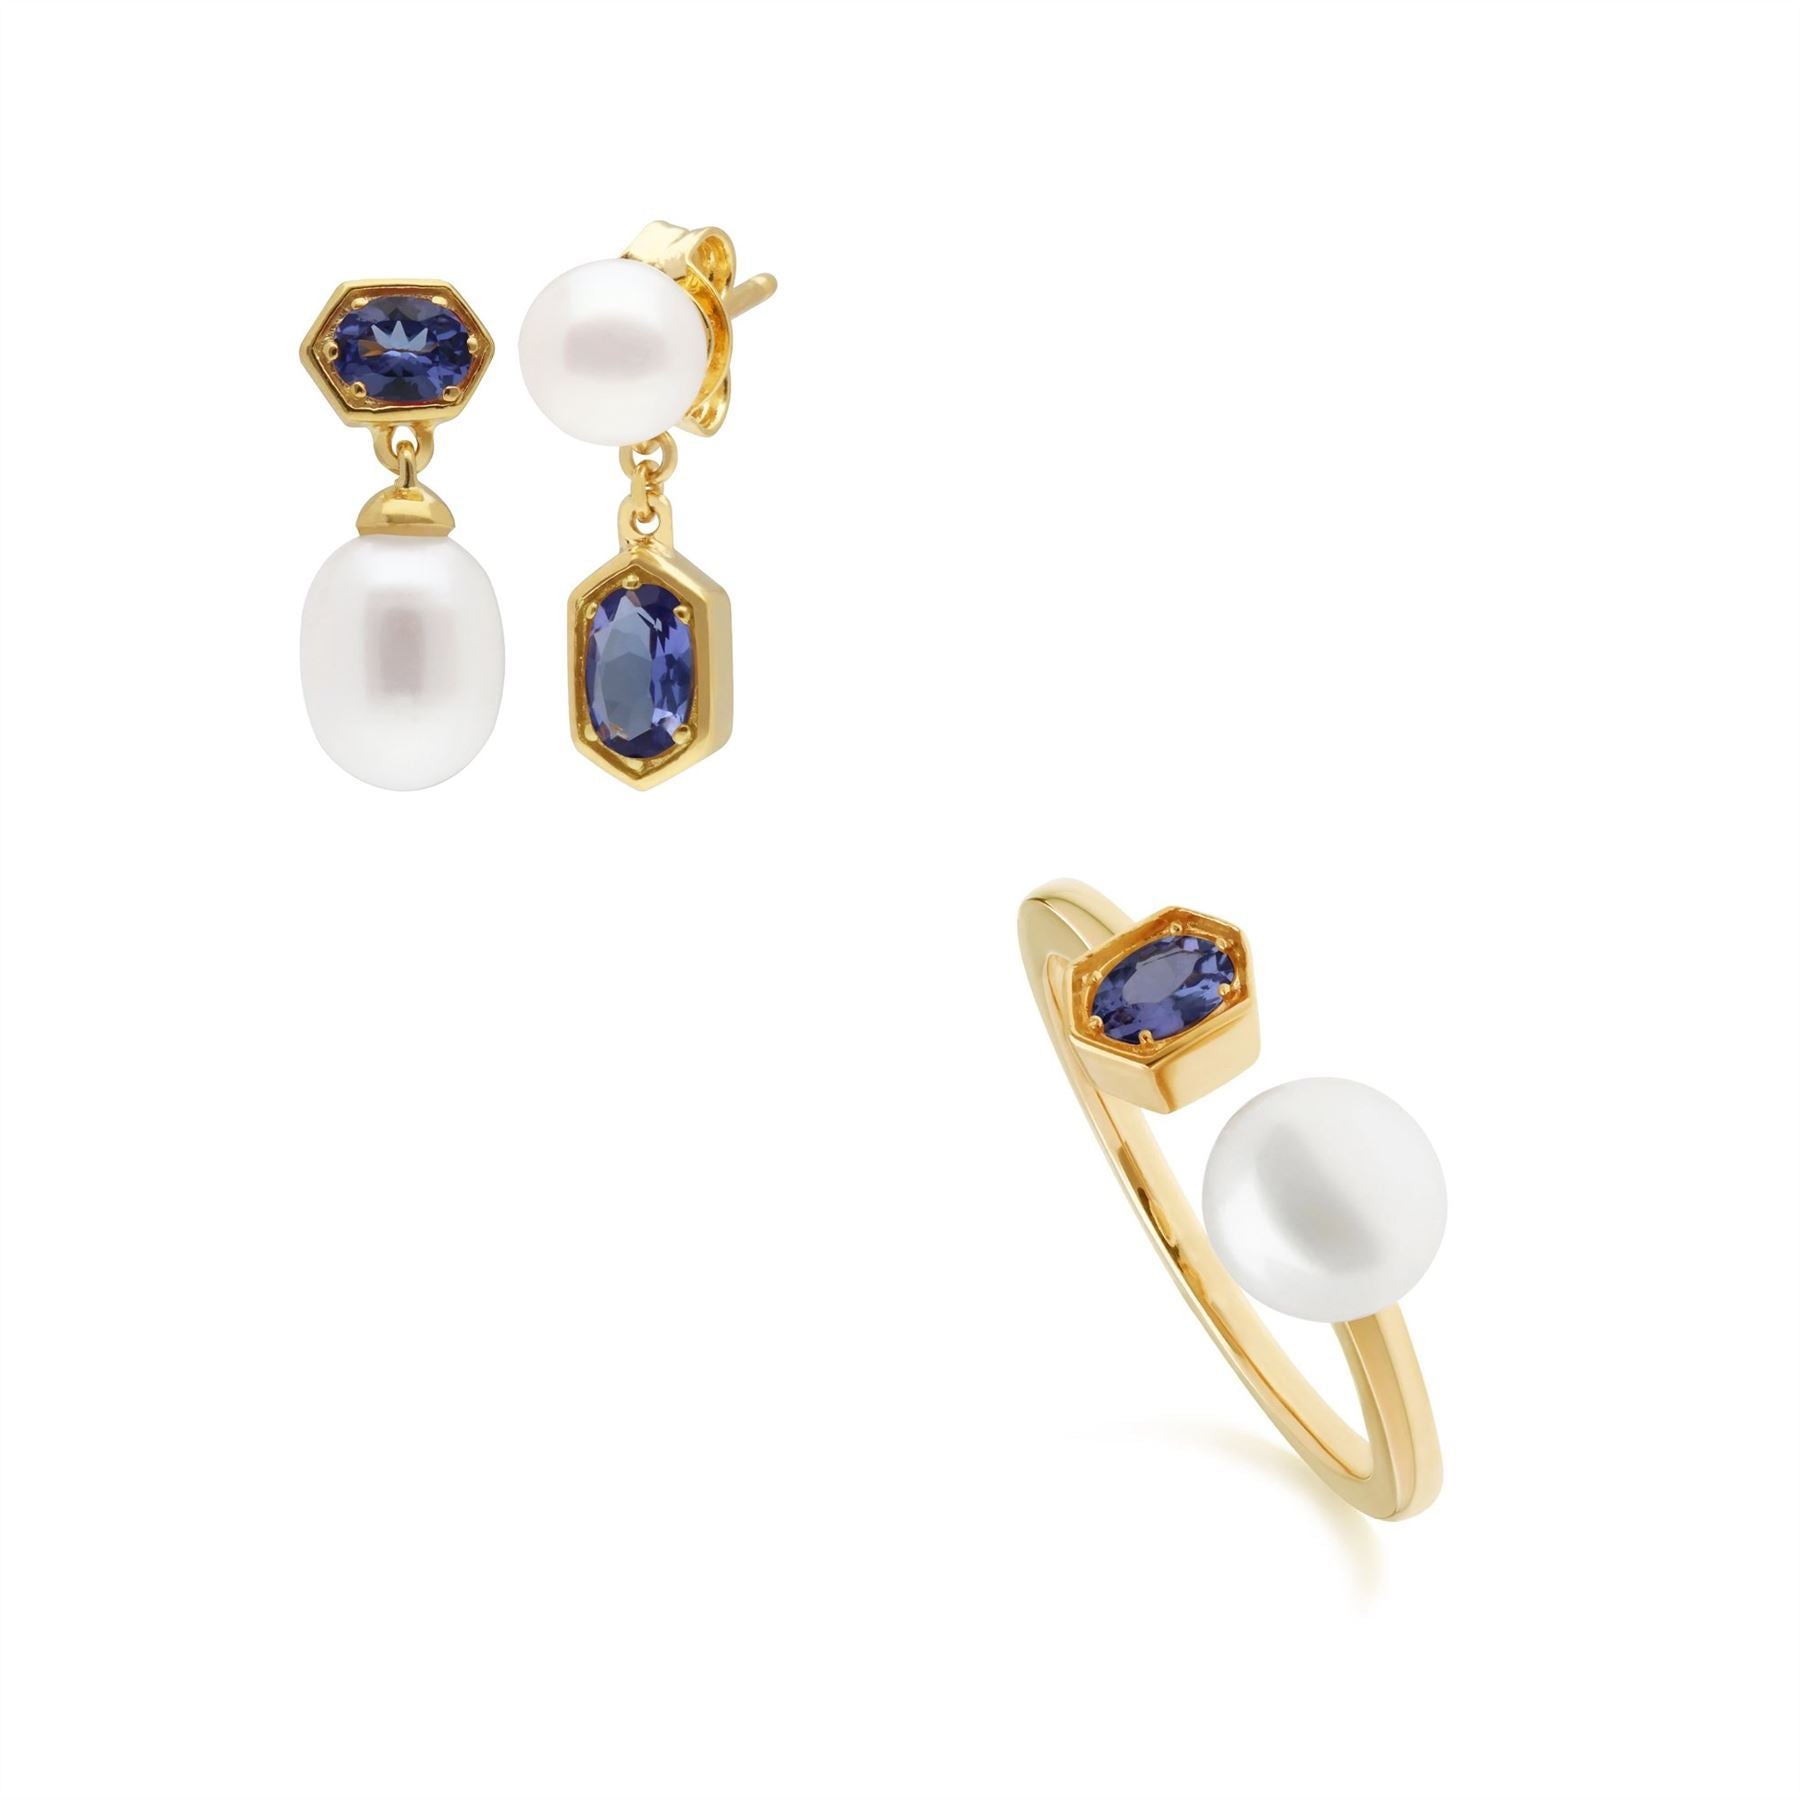 Modern Pearl & Tanzanite Earring & Ring Set in Gold Plated Sterling Silver